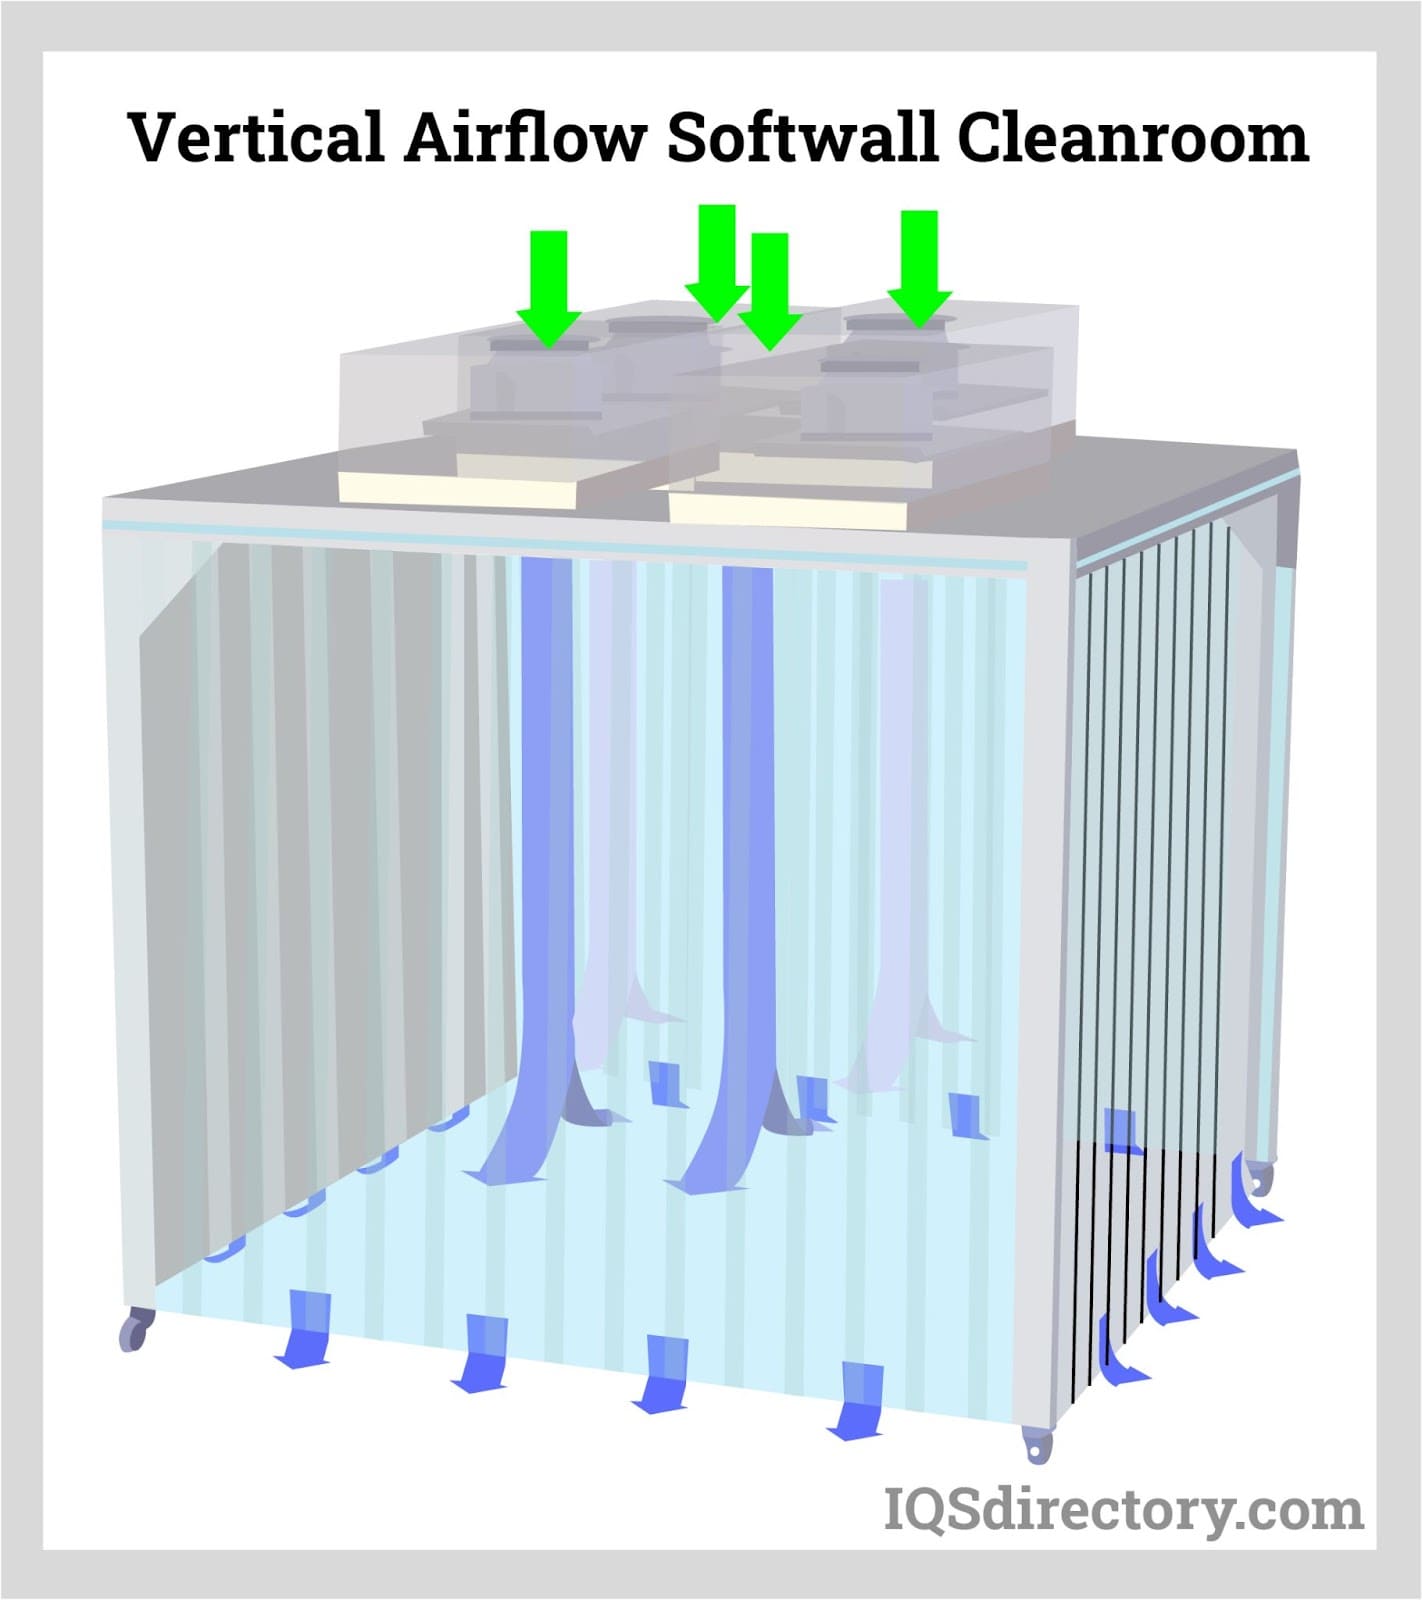 Vertical Airflow Softwall Cleanroom